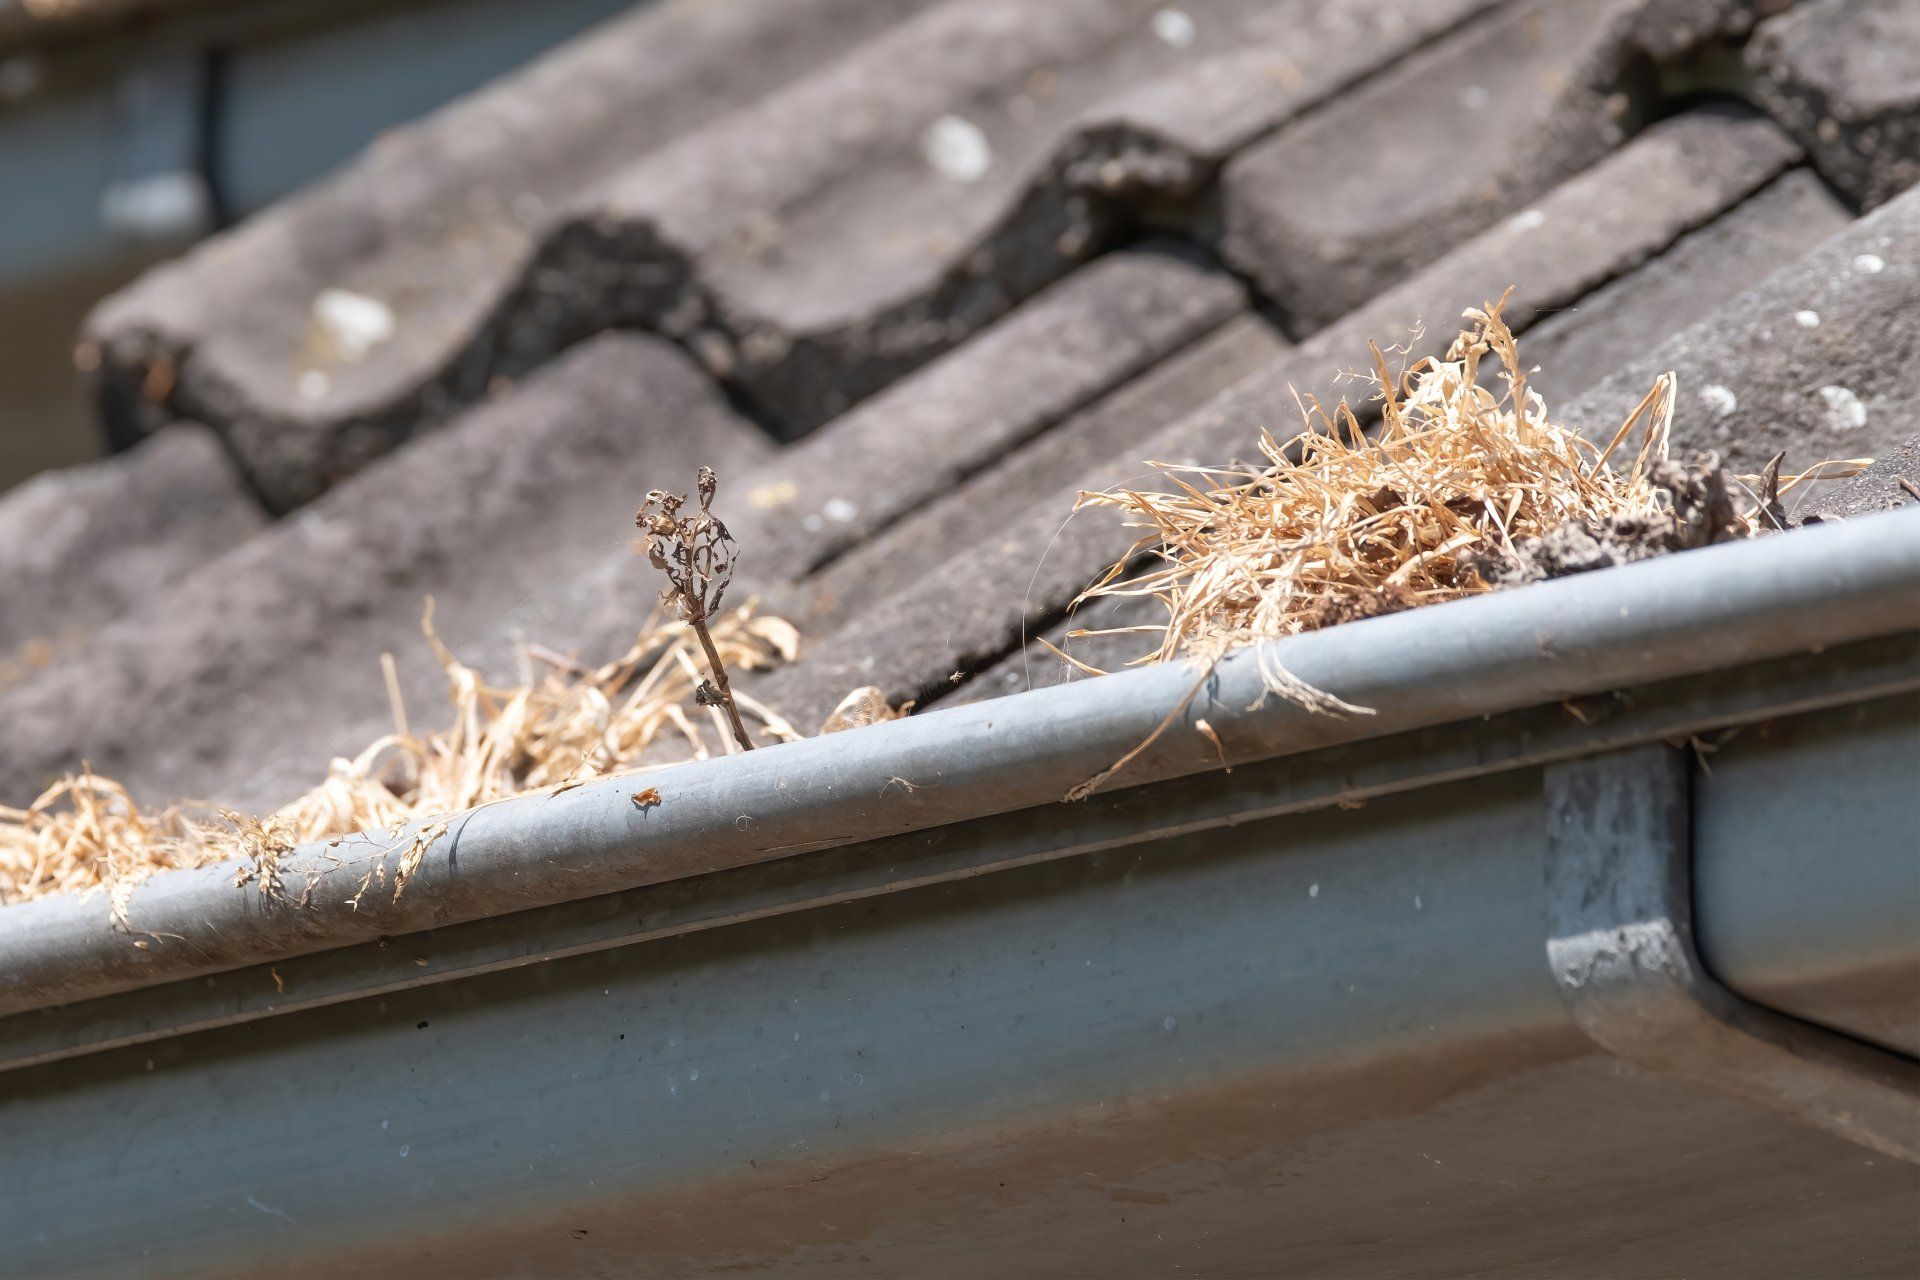 How much does it cost fto have your gutters cleaned?